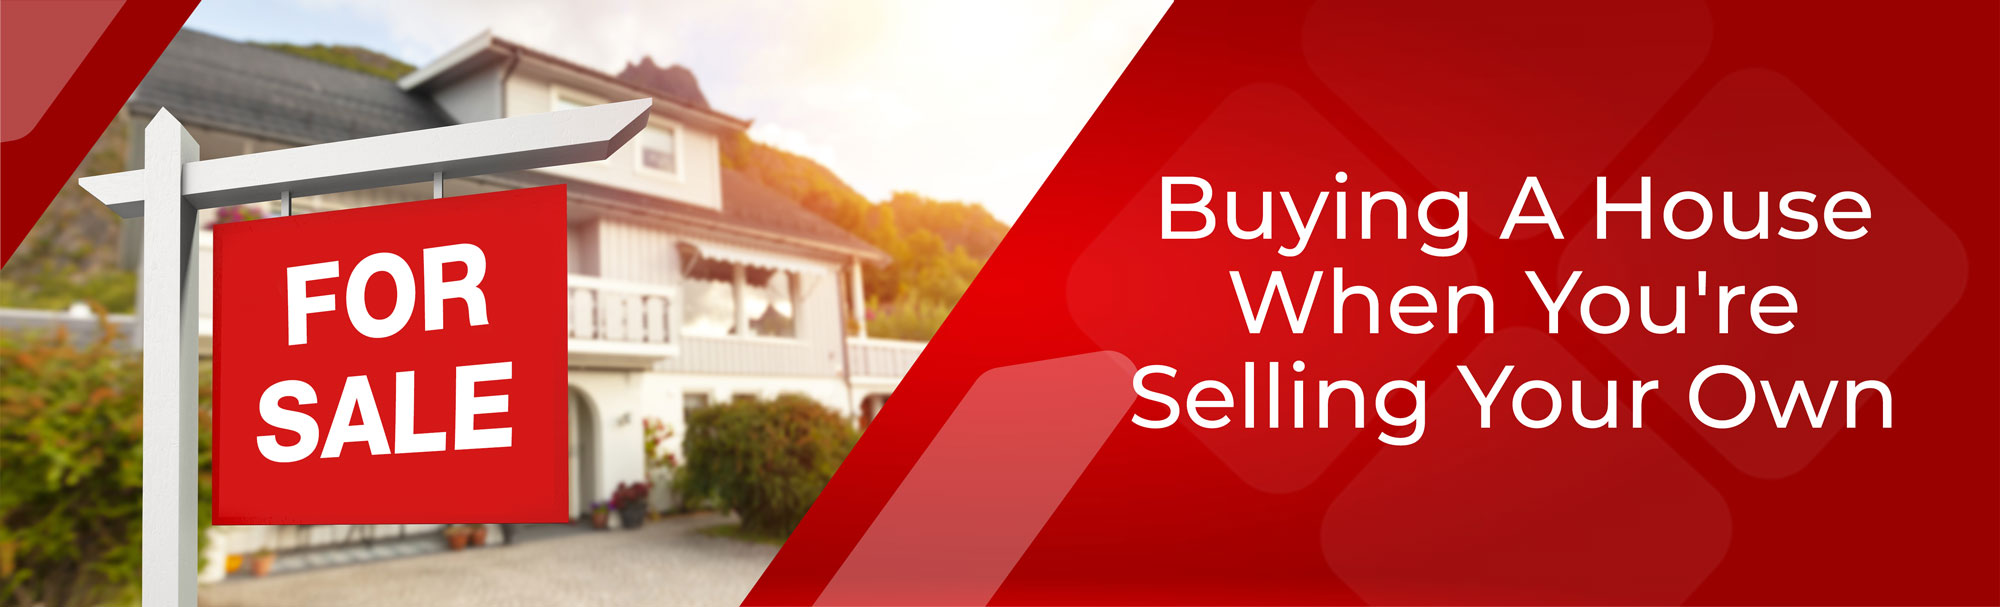 Buying A House When You're Selling Your Own - House for sale